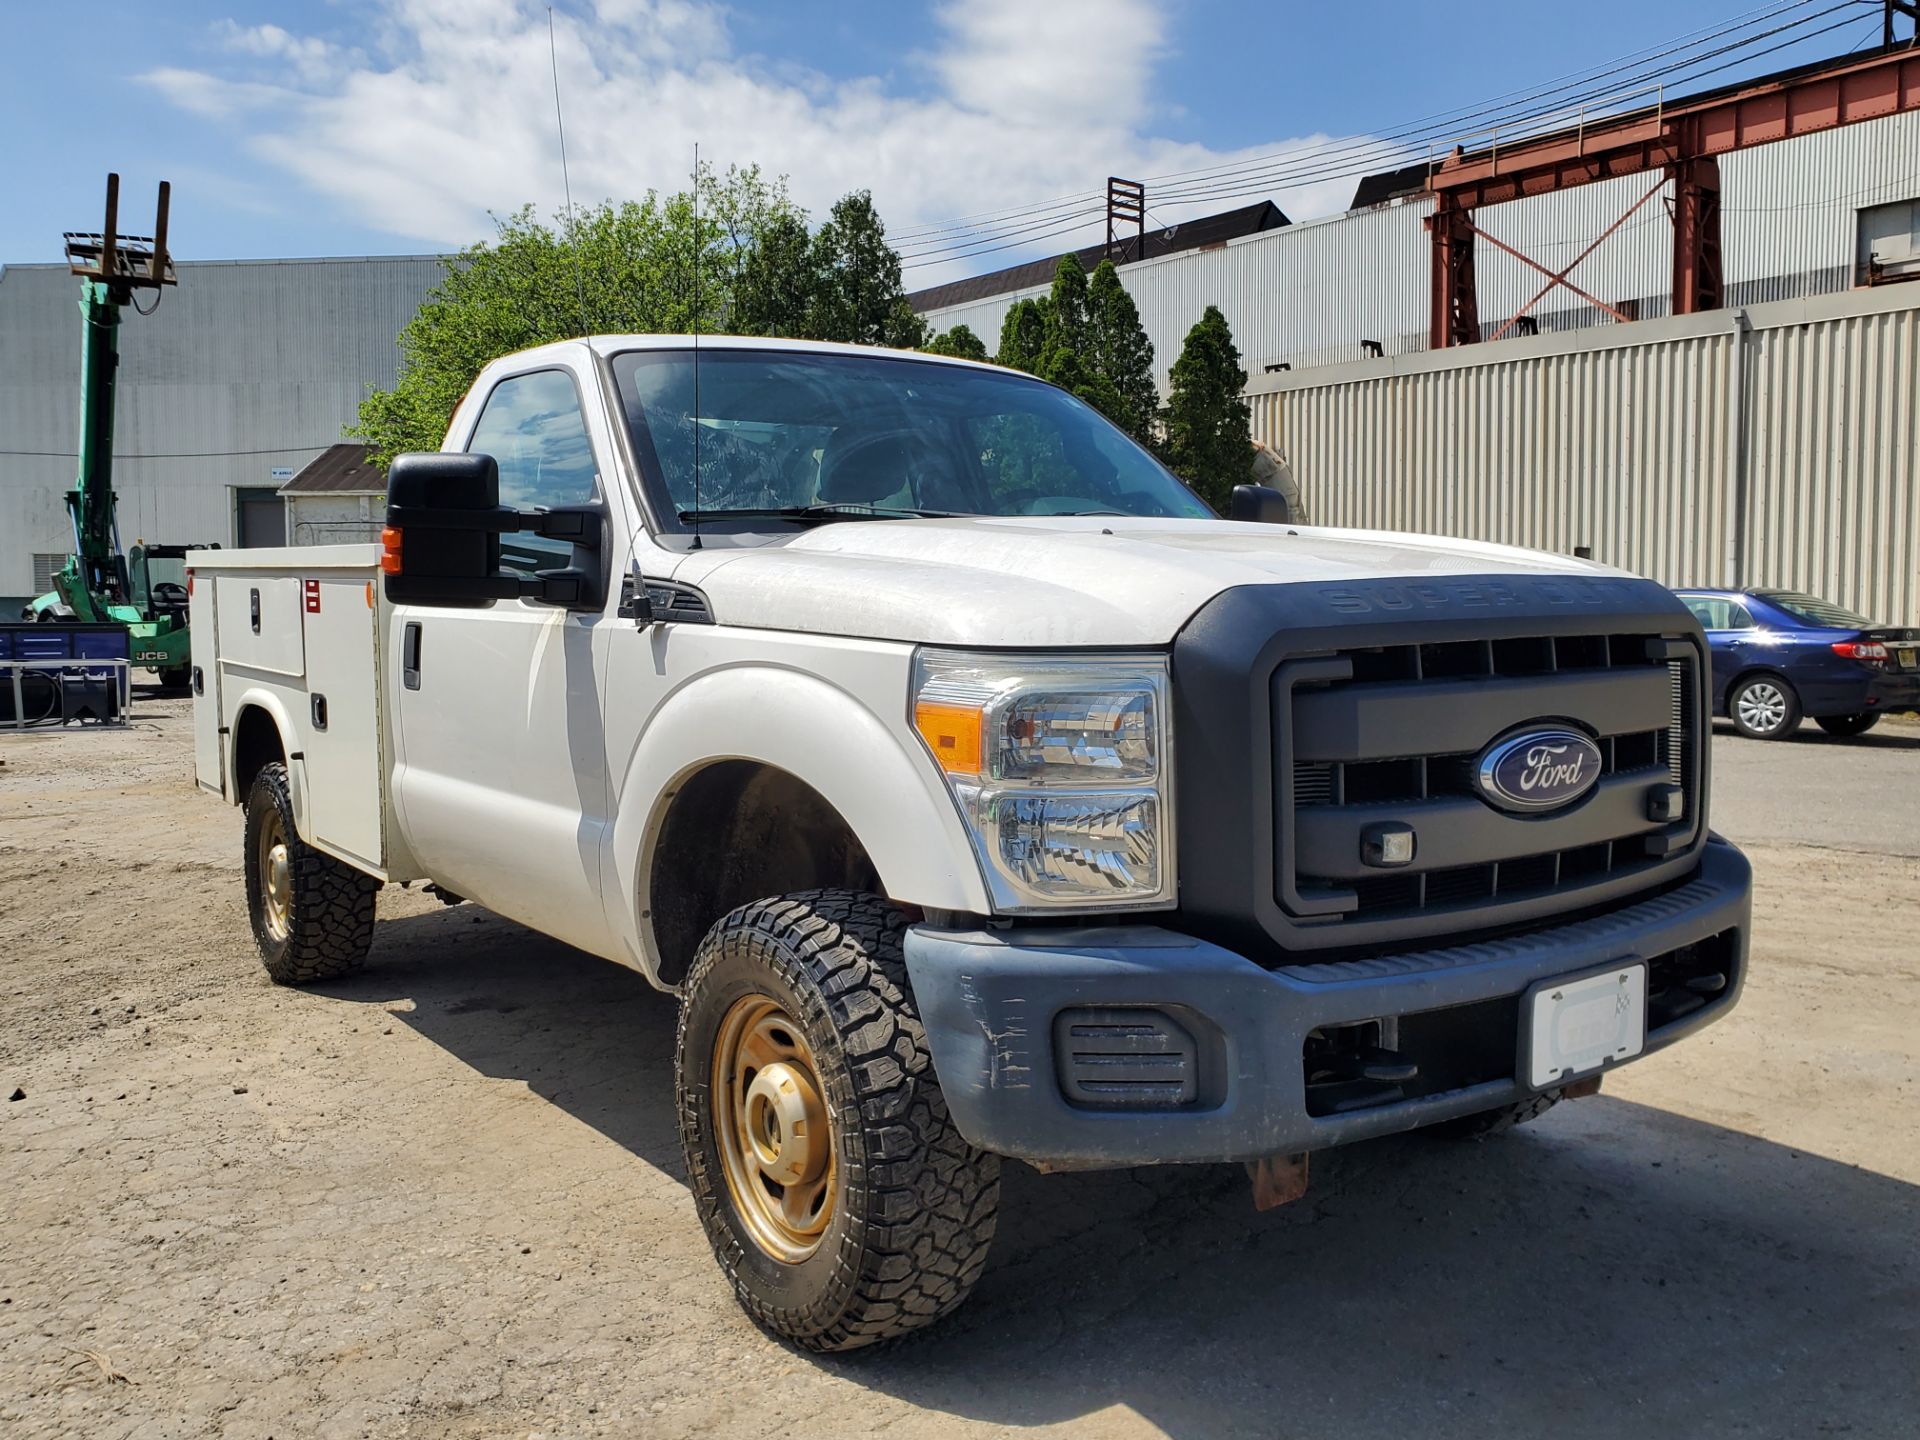 2016 Ford F350 Service Truck - Image 2 of 21